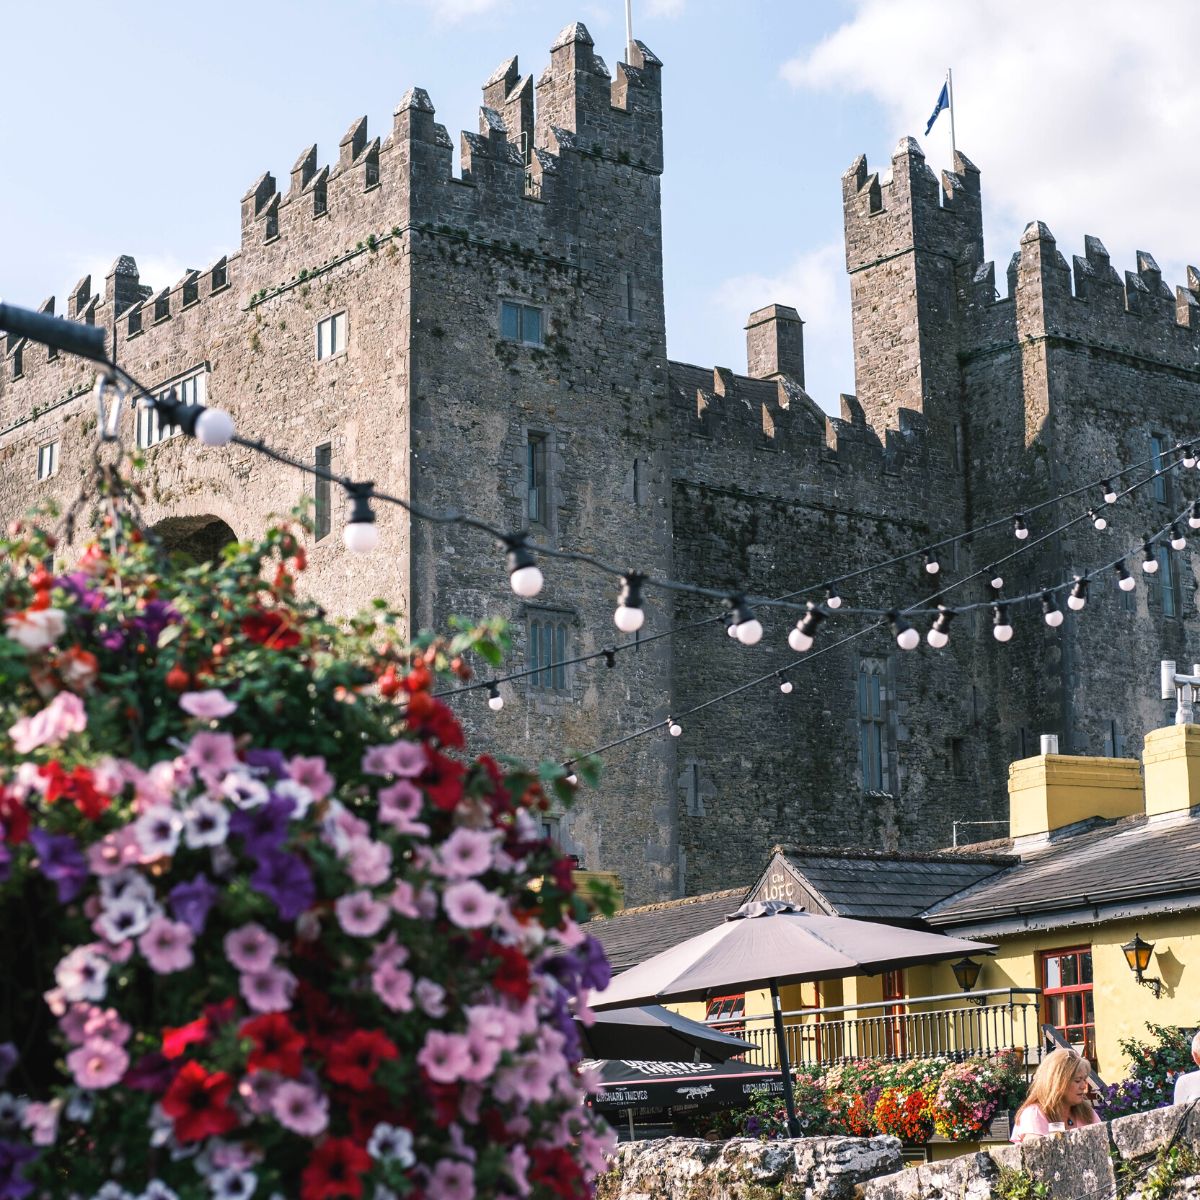 A castle in the background with bistro lights and fresh flowers at a cafe in front.